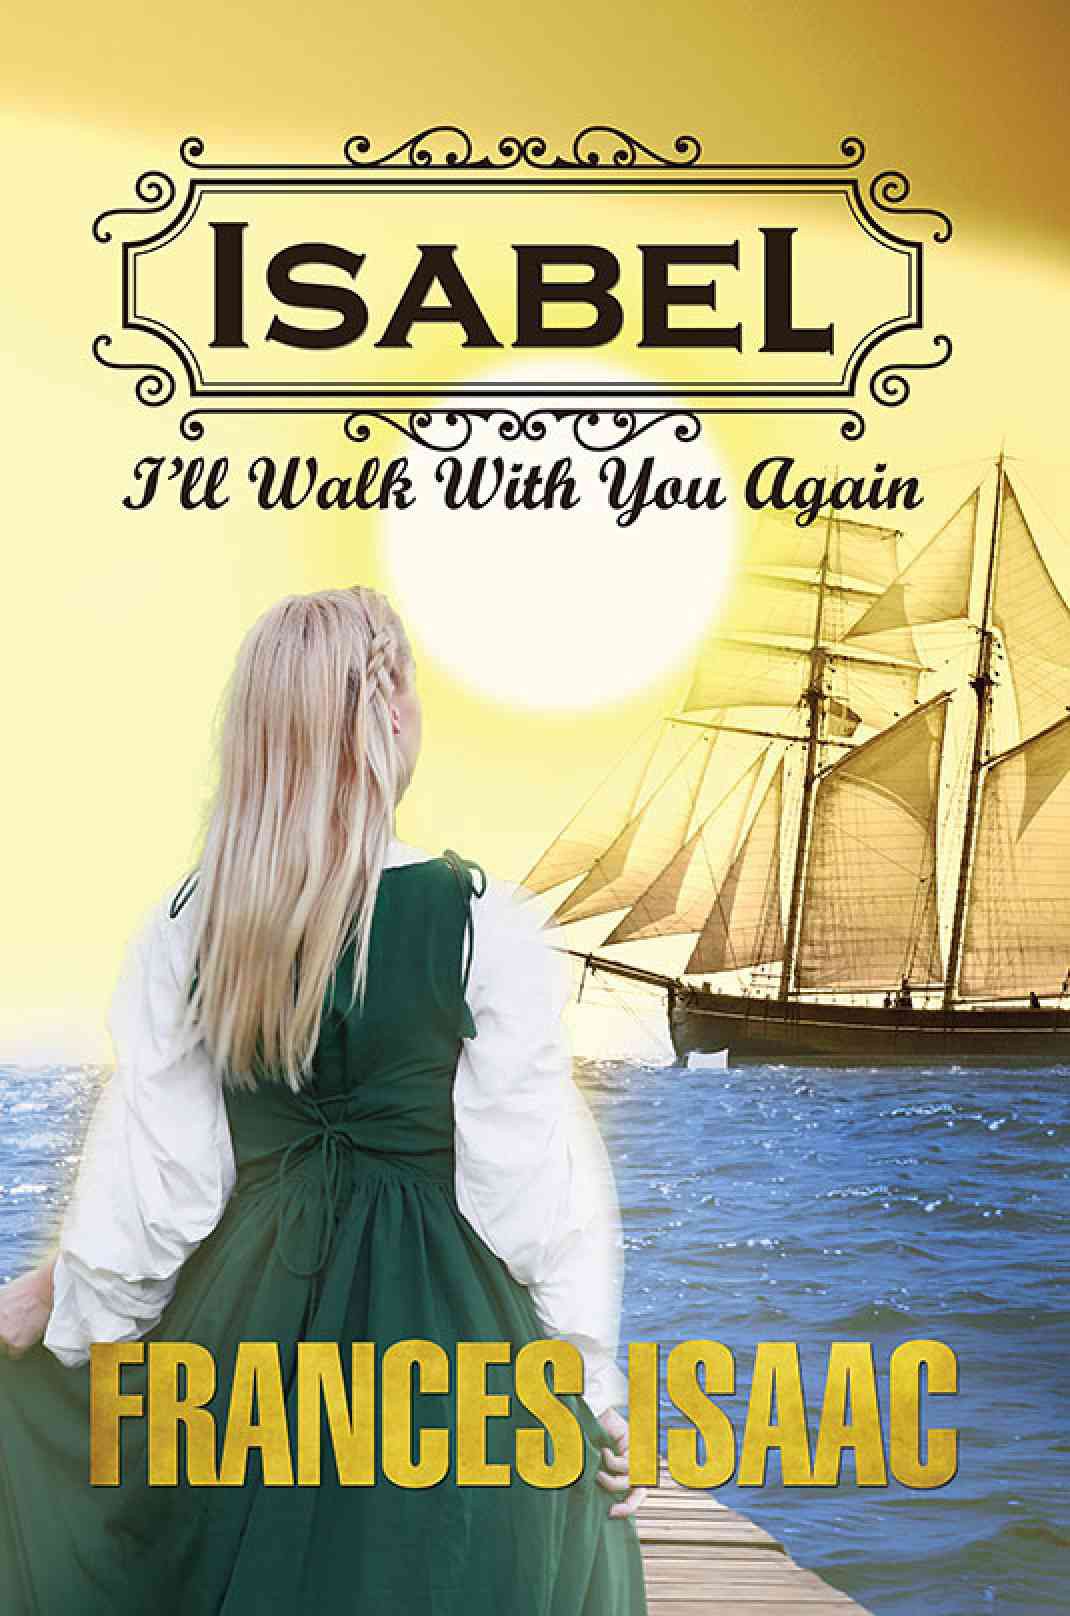 ‘Isabel’ Receives an Amazing Review on Amazon